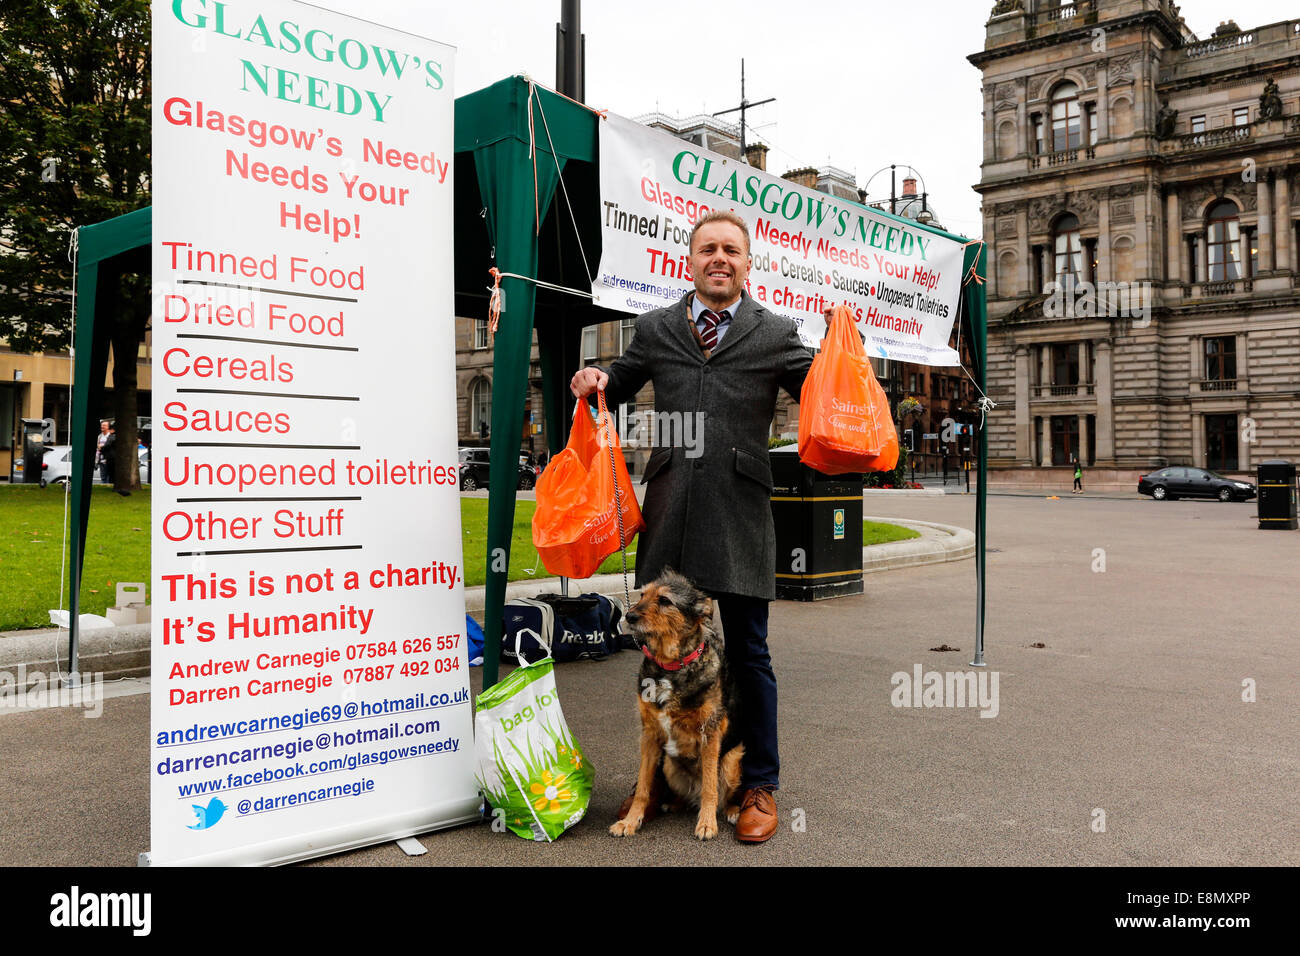 Glasgow, Scotland. 11th Oct, 2014. Andrew Carnegie, aged 45, from Tollcross in Glasgow, who set up the Foodbank charity 'Glasgow's Needy' set up a stall in George Square, Glasgow city centre, outside the City Chambers, with the intention of collecting contributions and also drawing attention to social inequality and the needs of the poor. Several passers- by contributed to his charity by handing in bags of food, including Colin Boyd, aged 38 Company Director from Kilwinning.  Credit:  Findlay/Alamy Live News Stock Photo